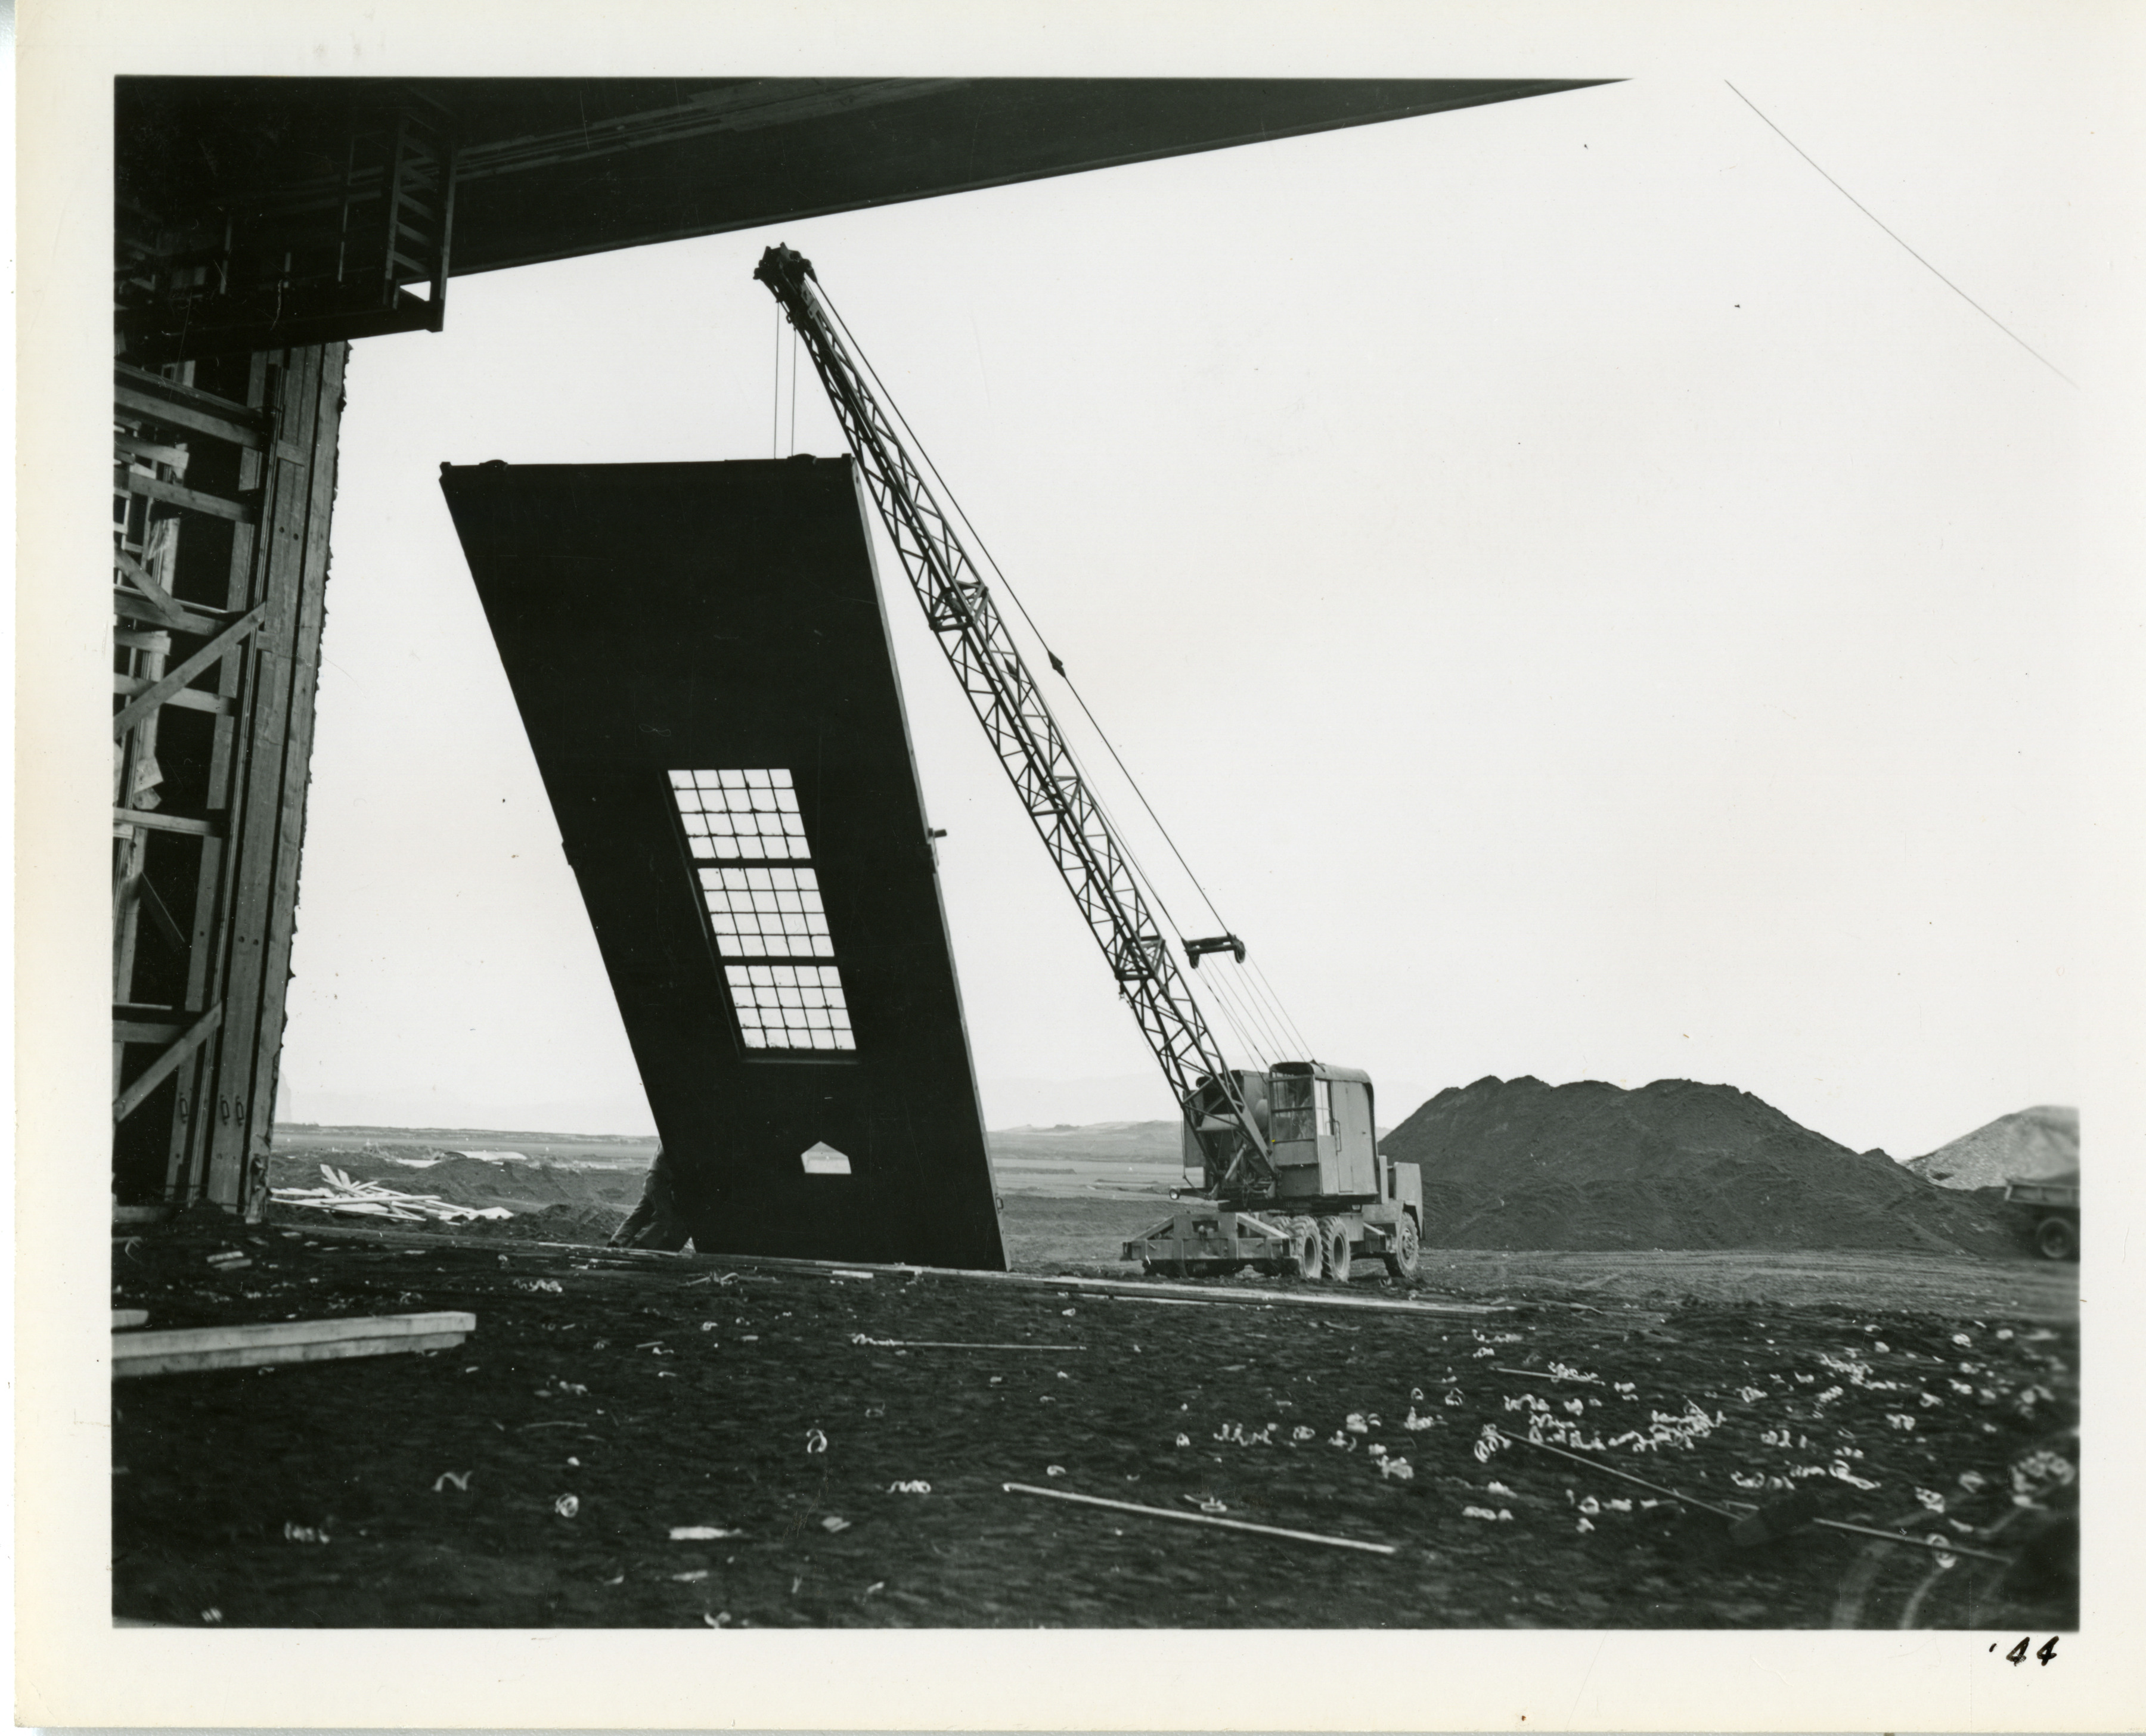 Crane raises up a prefabricated wall during the construction of an ...